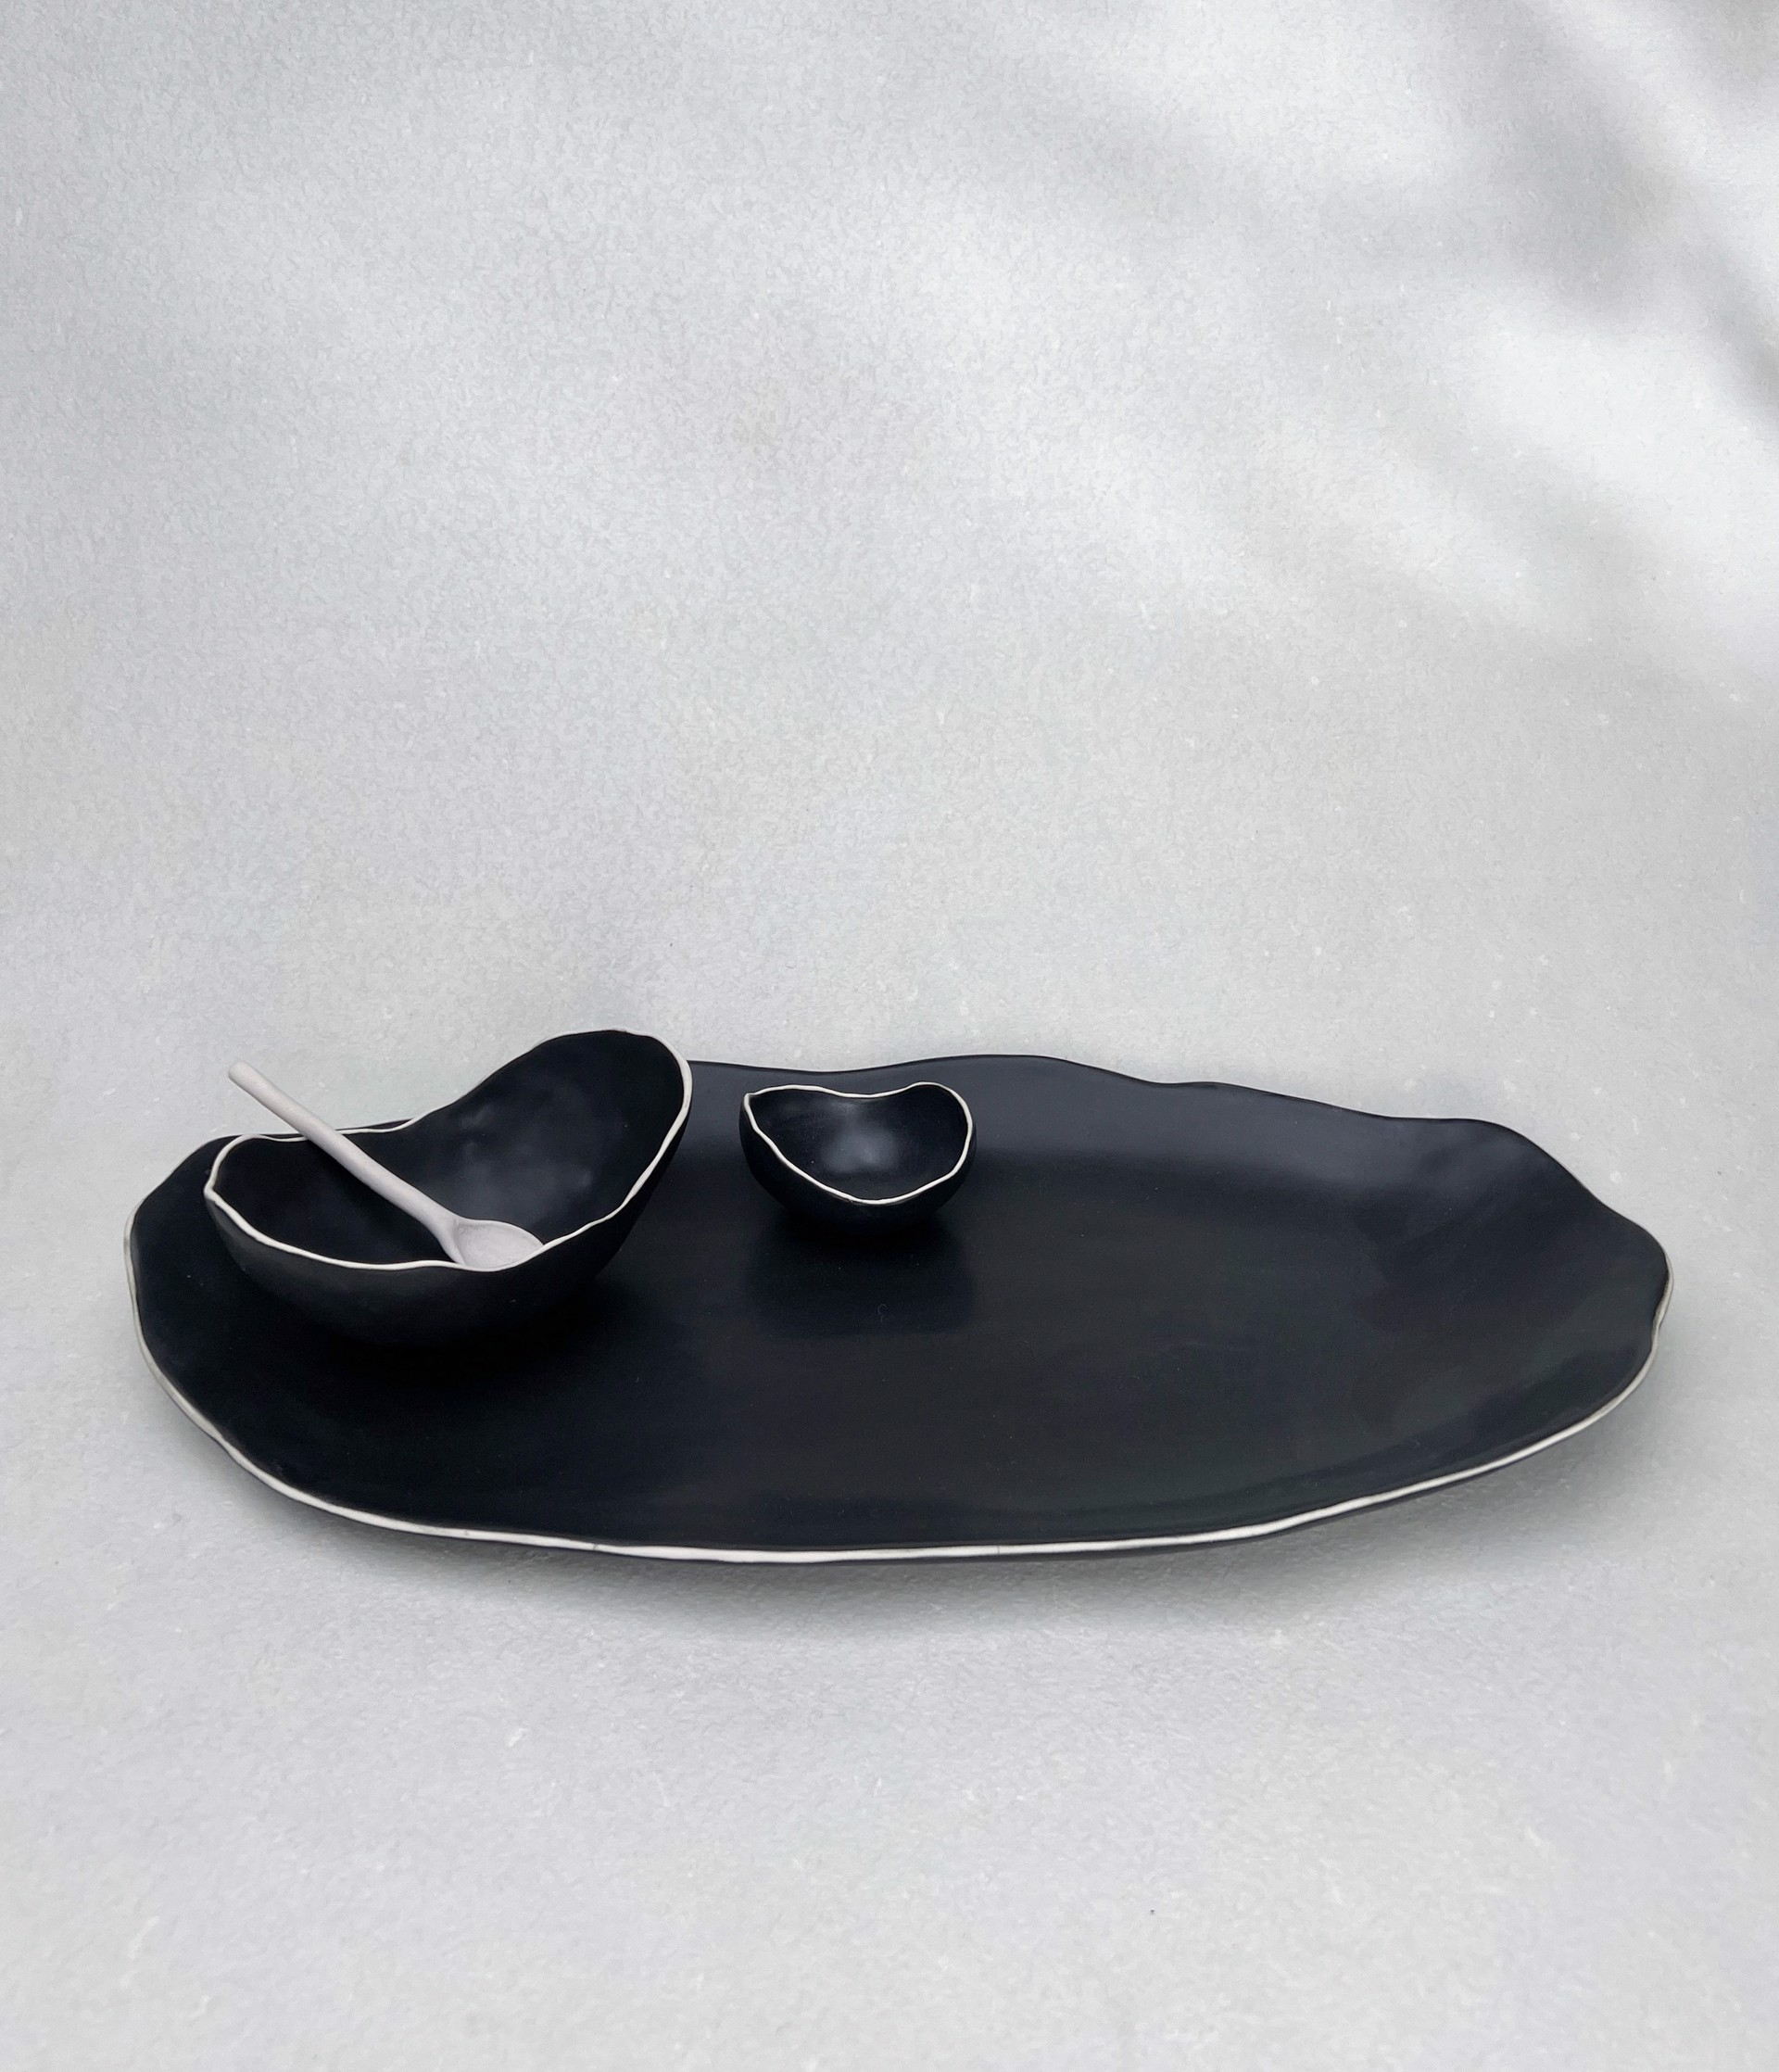 Appetizer Plate and Bowl Set - Black by Kate Tremel